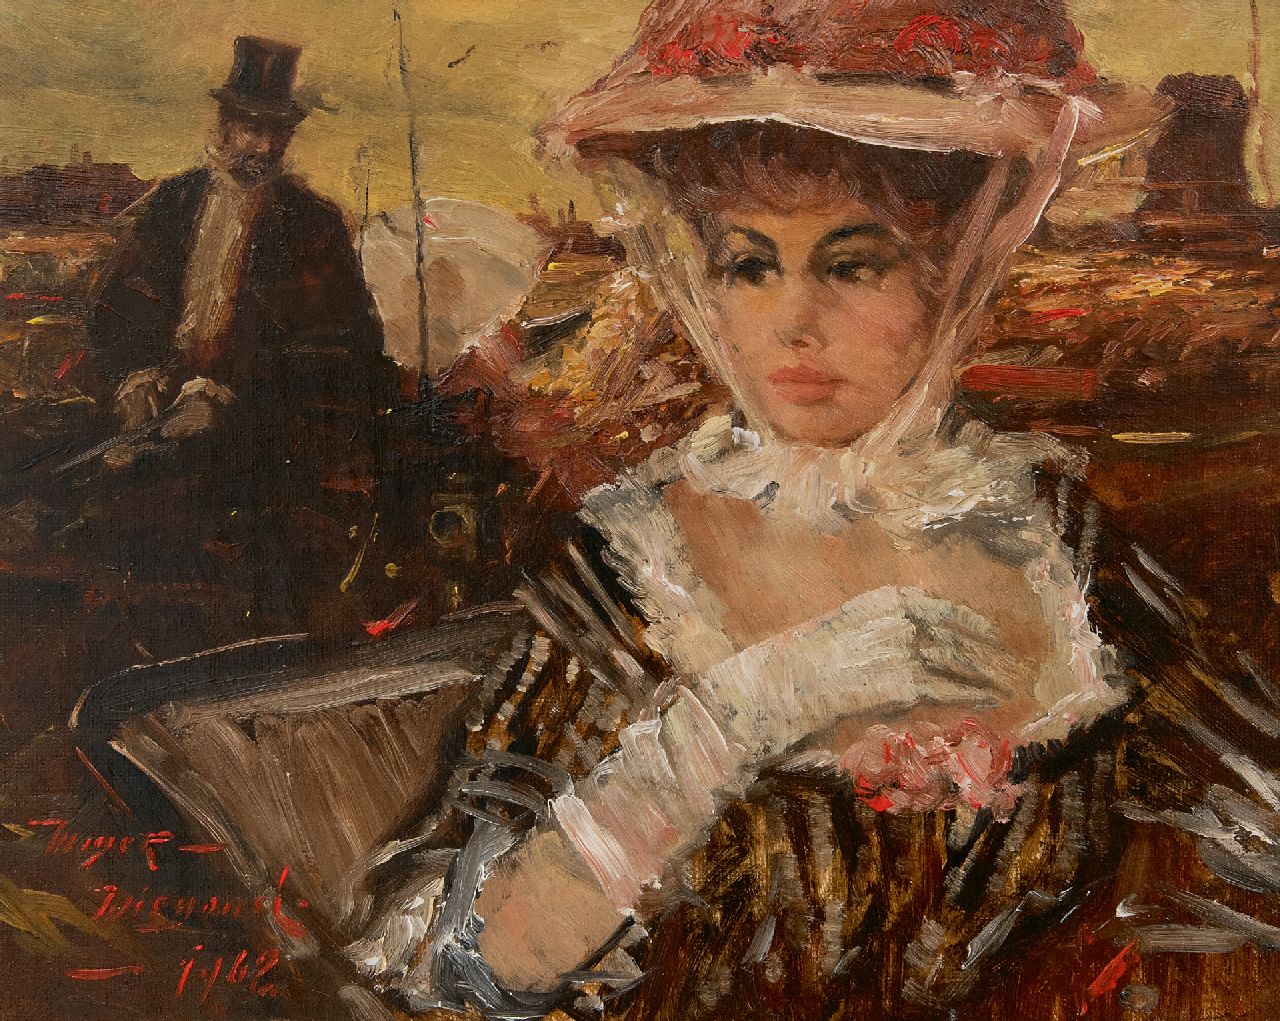 Meyer-Wiegand R.D.  | Rolf Dieter Meyer-Wiegand | Paintings offered for sale | Elegant lady in a carriage, oil on panel 24.0 x 30.0 cm, signed l.l. and dated 1962